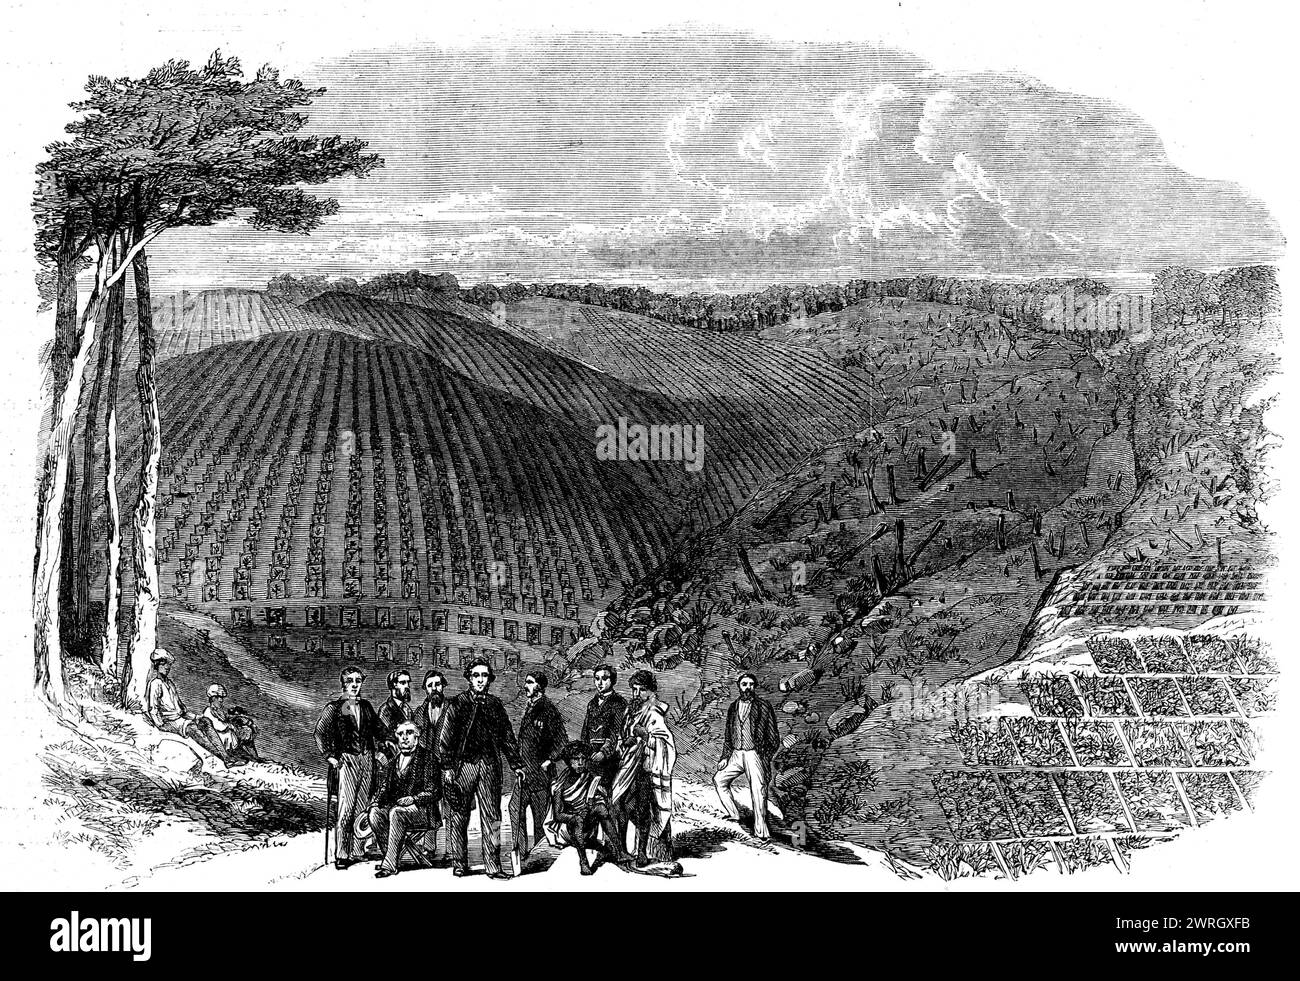 Peruvian bark tree plantations in the Neilgherry Hills, India: Sir William Denison, Governor of Madras, planting the first tree in a new plantation, 1862. 'Mr. Clements Markham, of the India Office, was intrusted...with the duty of superintending all the necessary arrangements for the collection of cinchona plants and seeds in South America, and for their introduction into India...Mr. Markham...penetrated into the forests of Caravaya, in Southern Peru, which had never before been trodden by any European...The supply of bark from South America was every year becoming more and more precarious, o Stock Photo